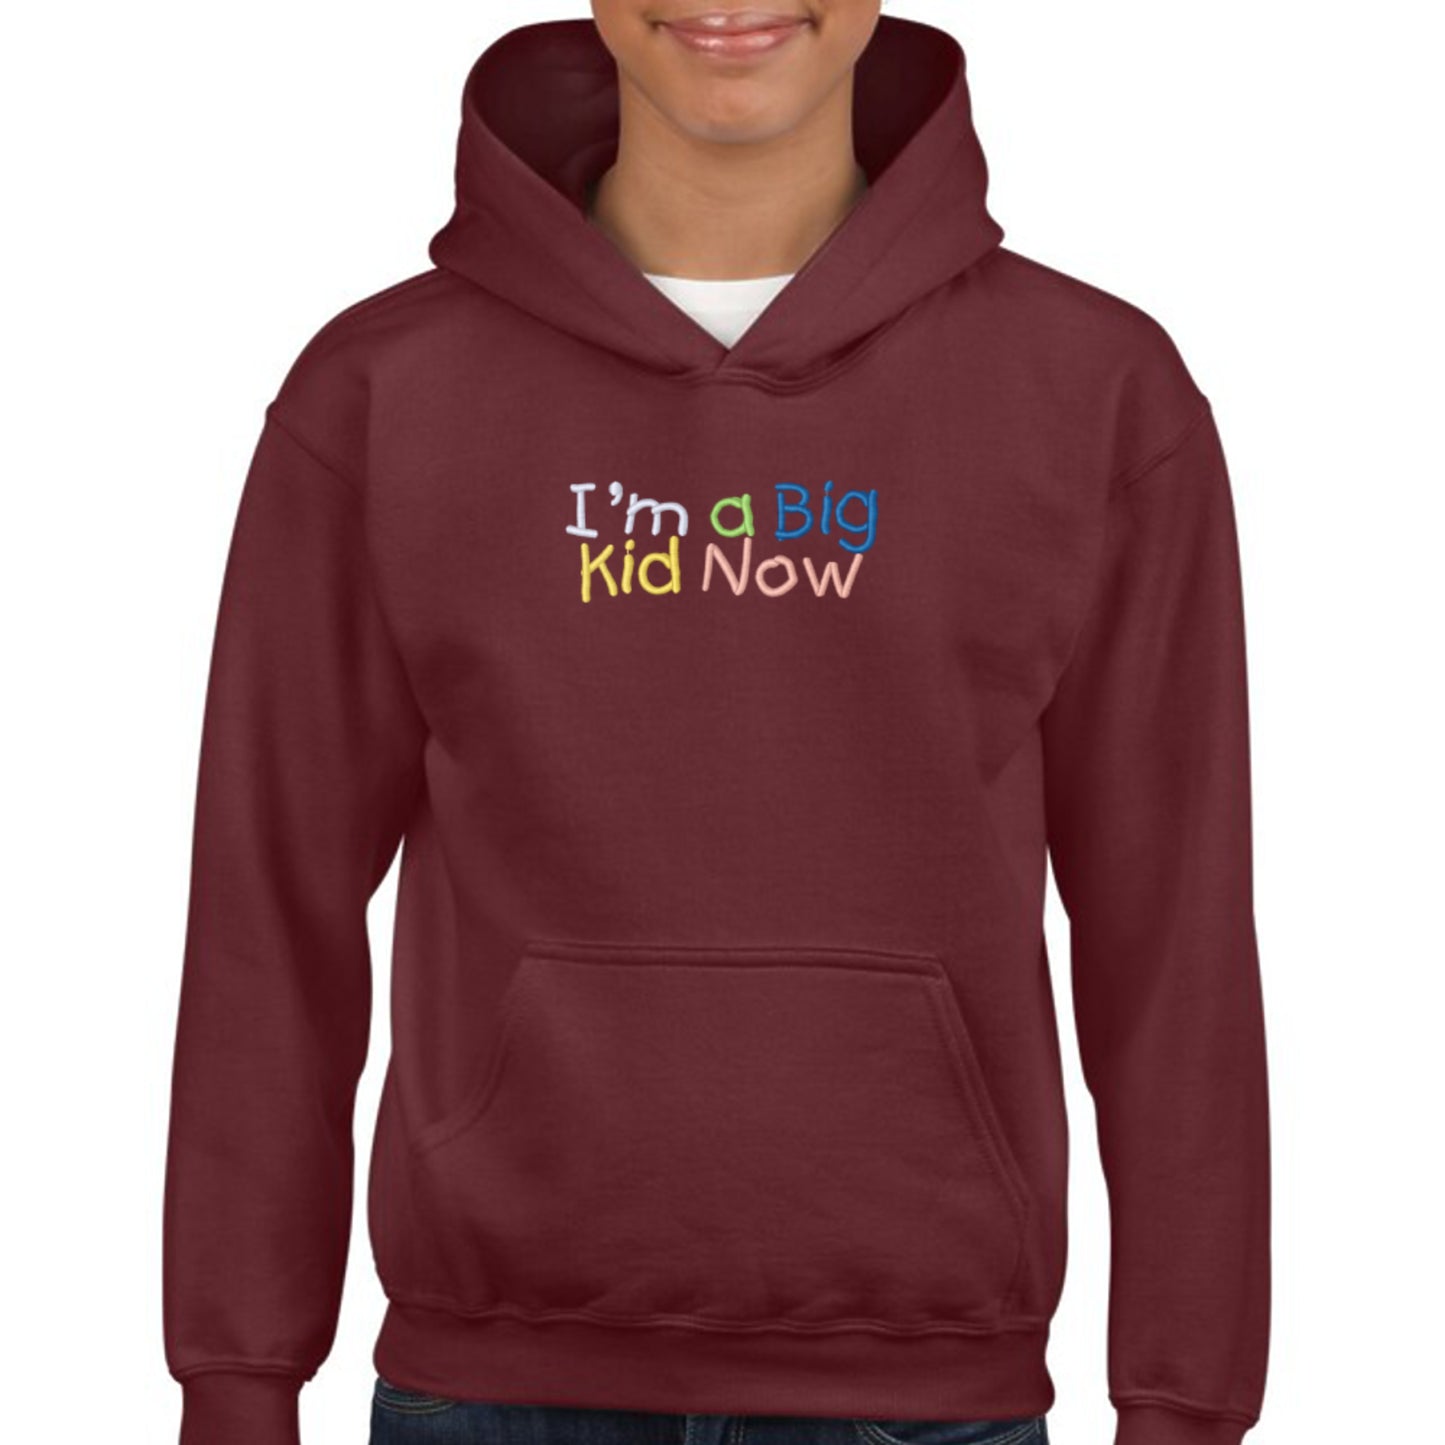 Youth Embroidered 'I'm a Big Kid Now" Hoodie or Crewneck. Long sleeve, Classic fit, Unisex